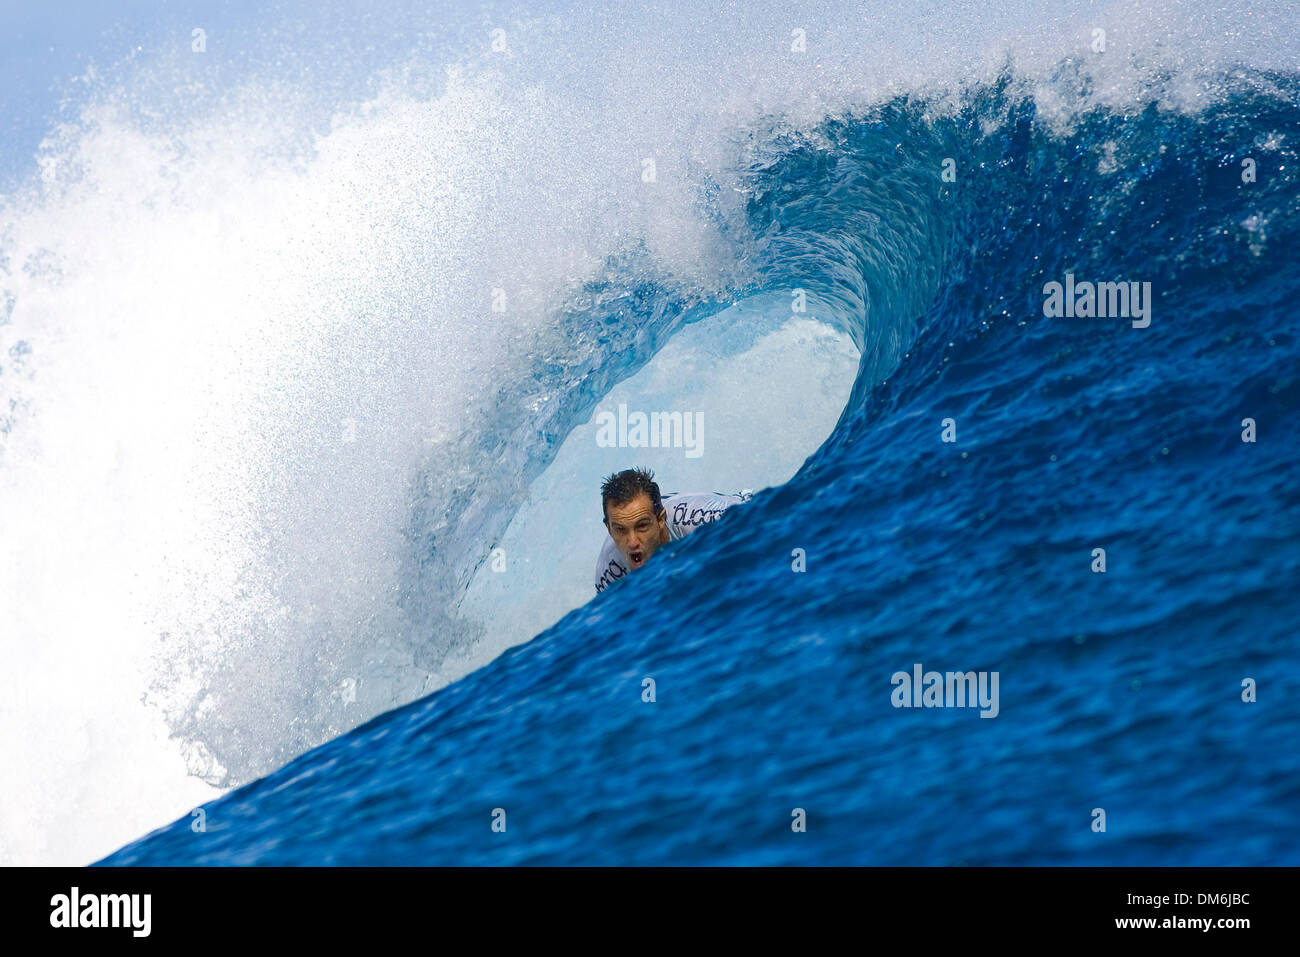 May 14, 2005; Teahupoo, Tahiti, TAHITI; DARREN O'RAFFERTY (Bonny Hills, NSW, Aus) (pictured) posted a strong win over current ASP ratings leader Trent Munro (Aus) and wildcard Hira Teriinatoofa (Tah) in round one of the Billabong Pro Tahiti, Teahupoo today. OÕRafferty advanced directly to round three, bypassing the 'sudden death' round two. The Billabong Pro, Teahupoo is the third  Stock Photo